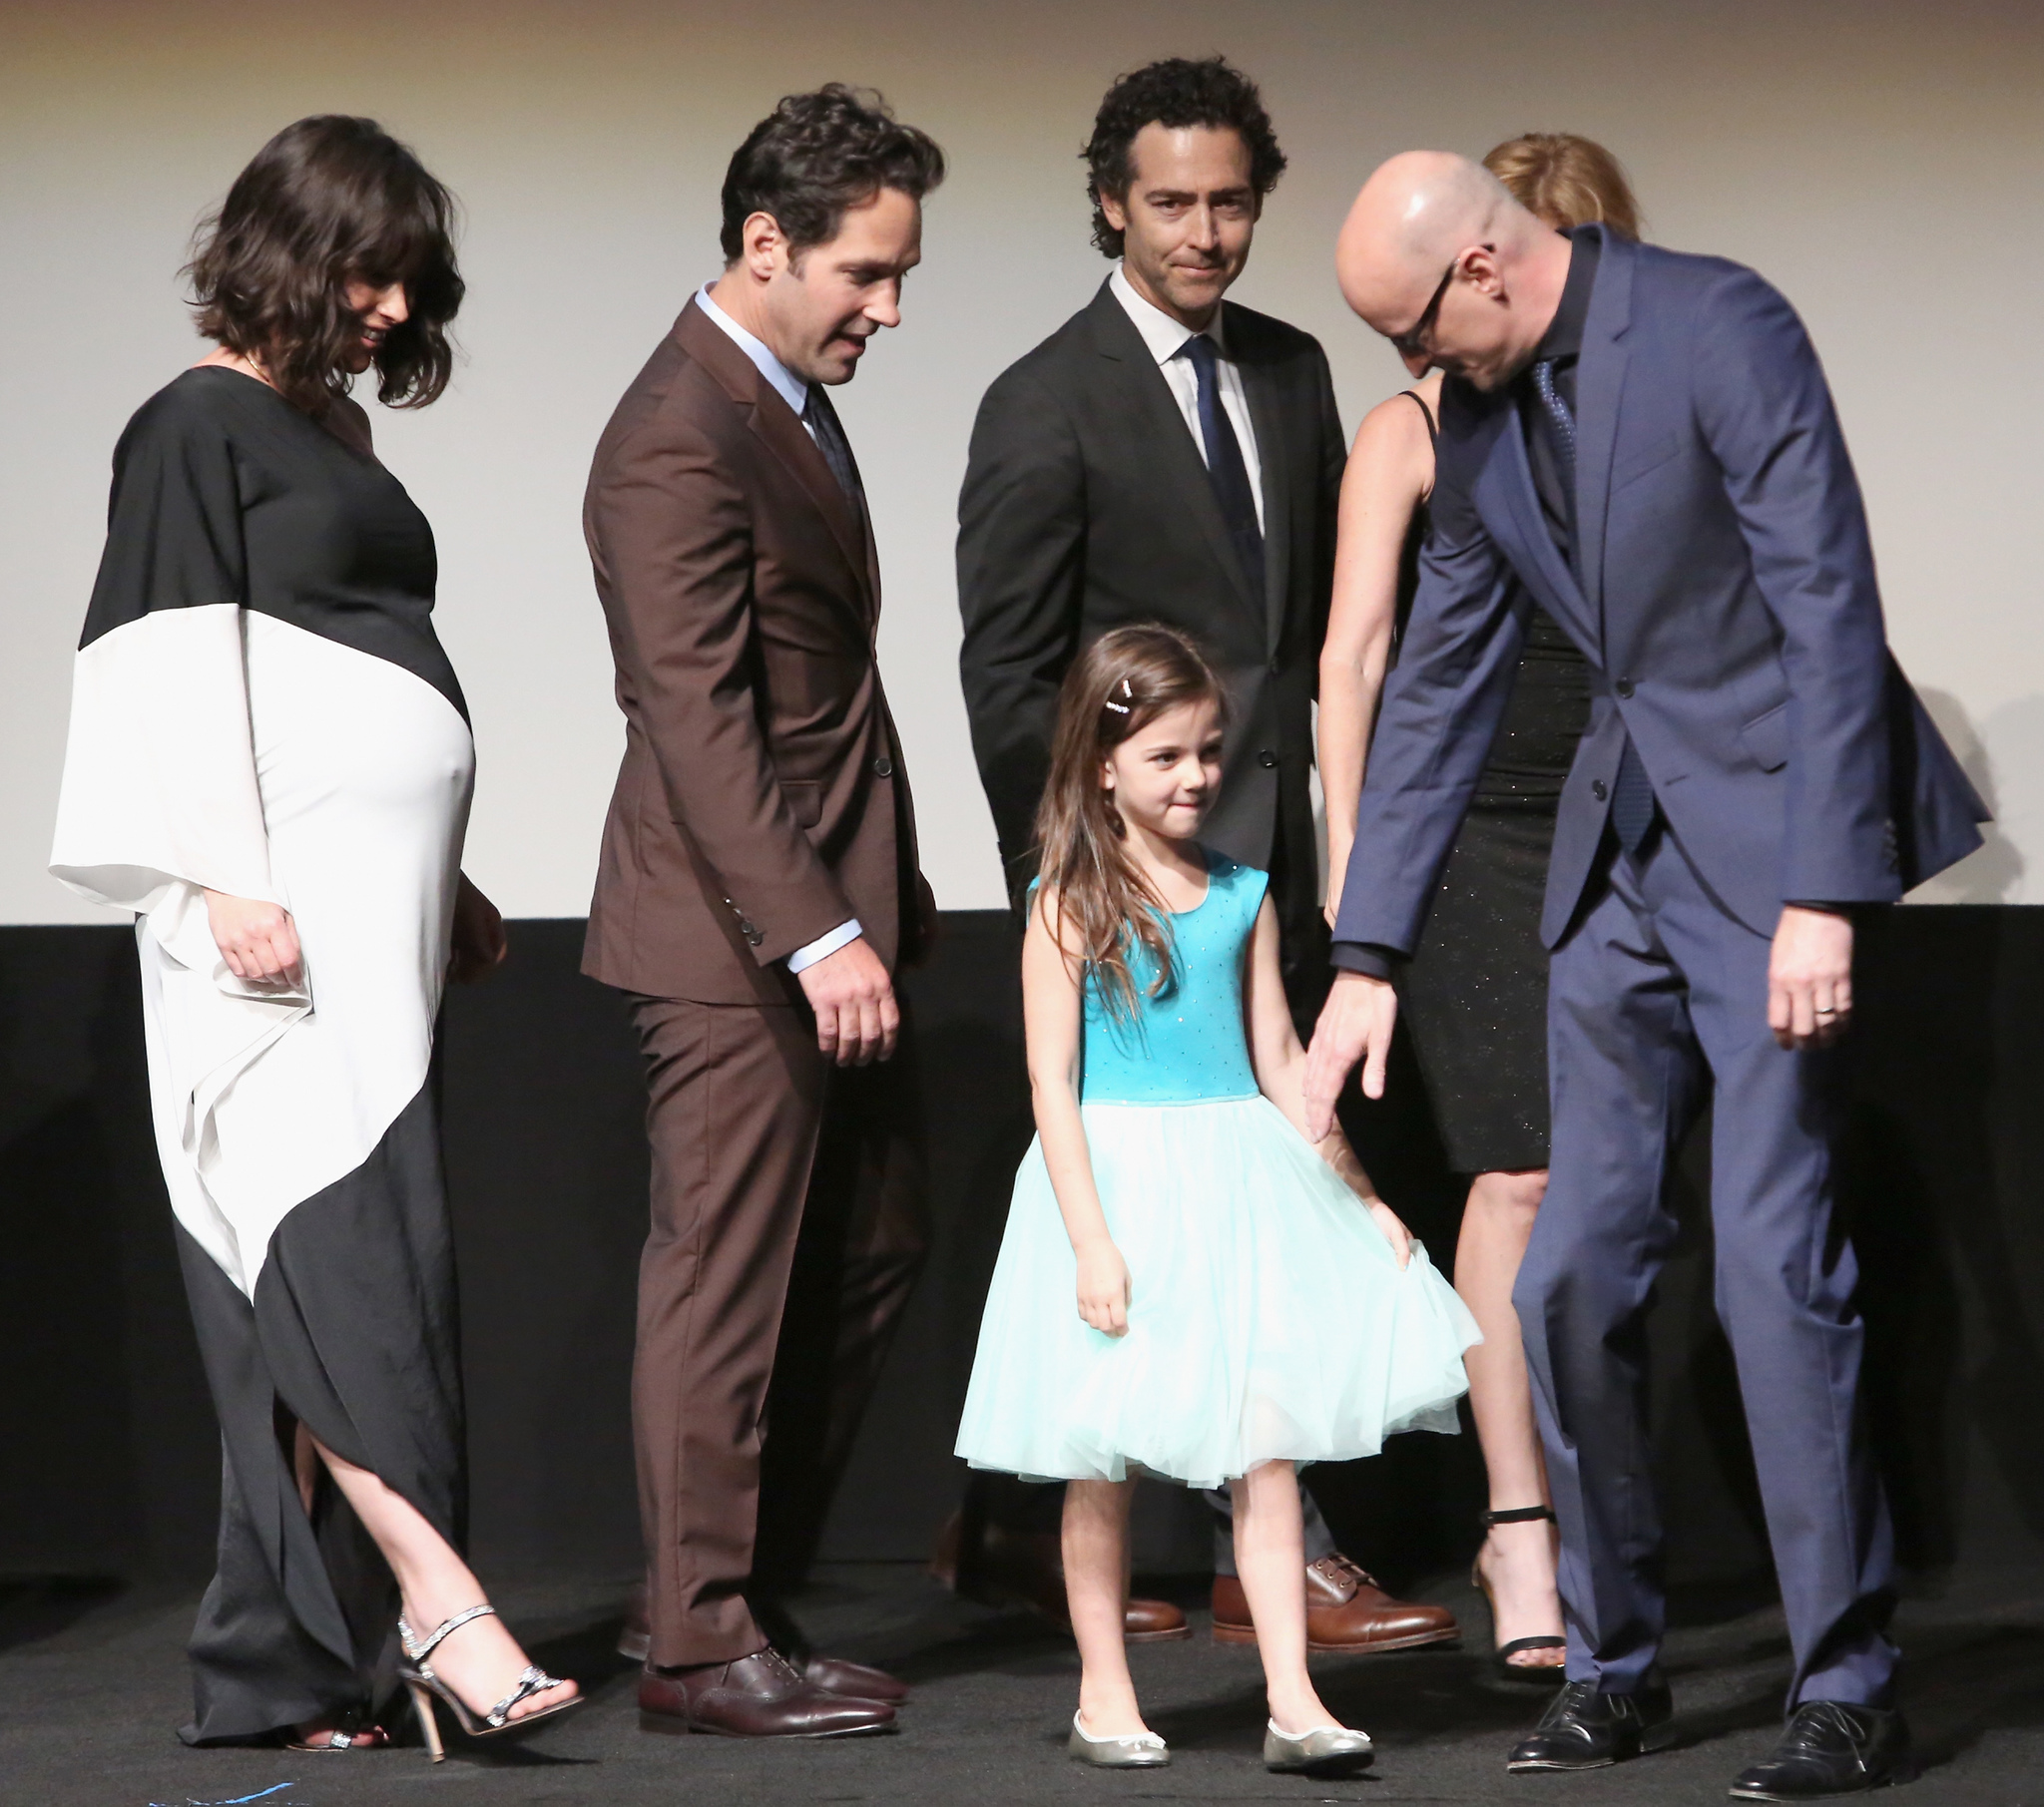 Peyton Reed, Paul Rudd, John Fortson, Evangeline Lilly and Abby Ryder Fortson at event of Skruzdeliukas (2015)